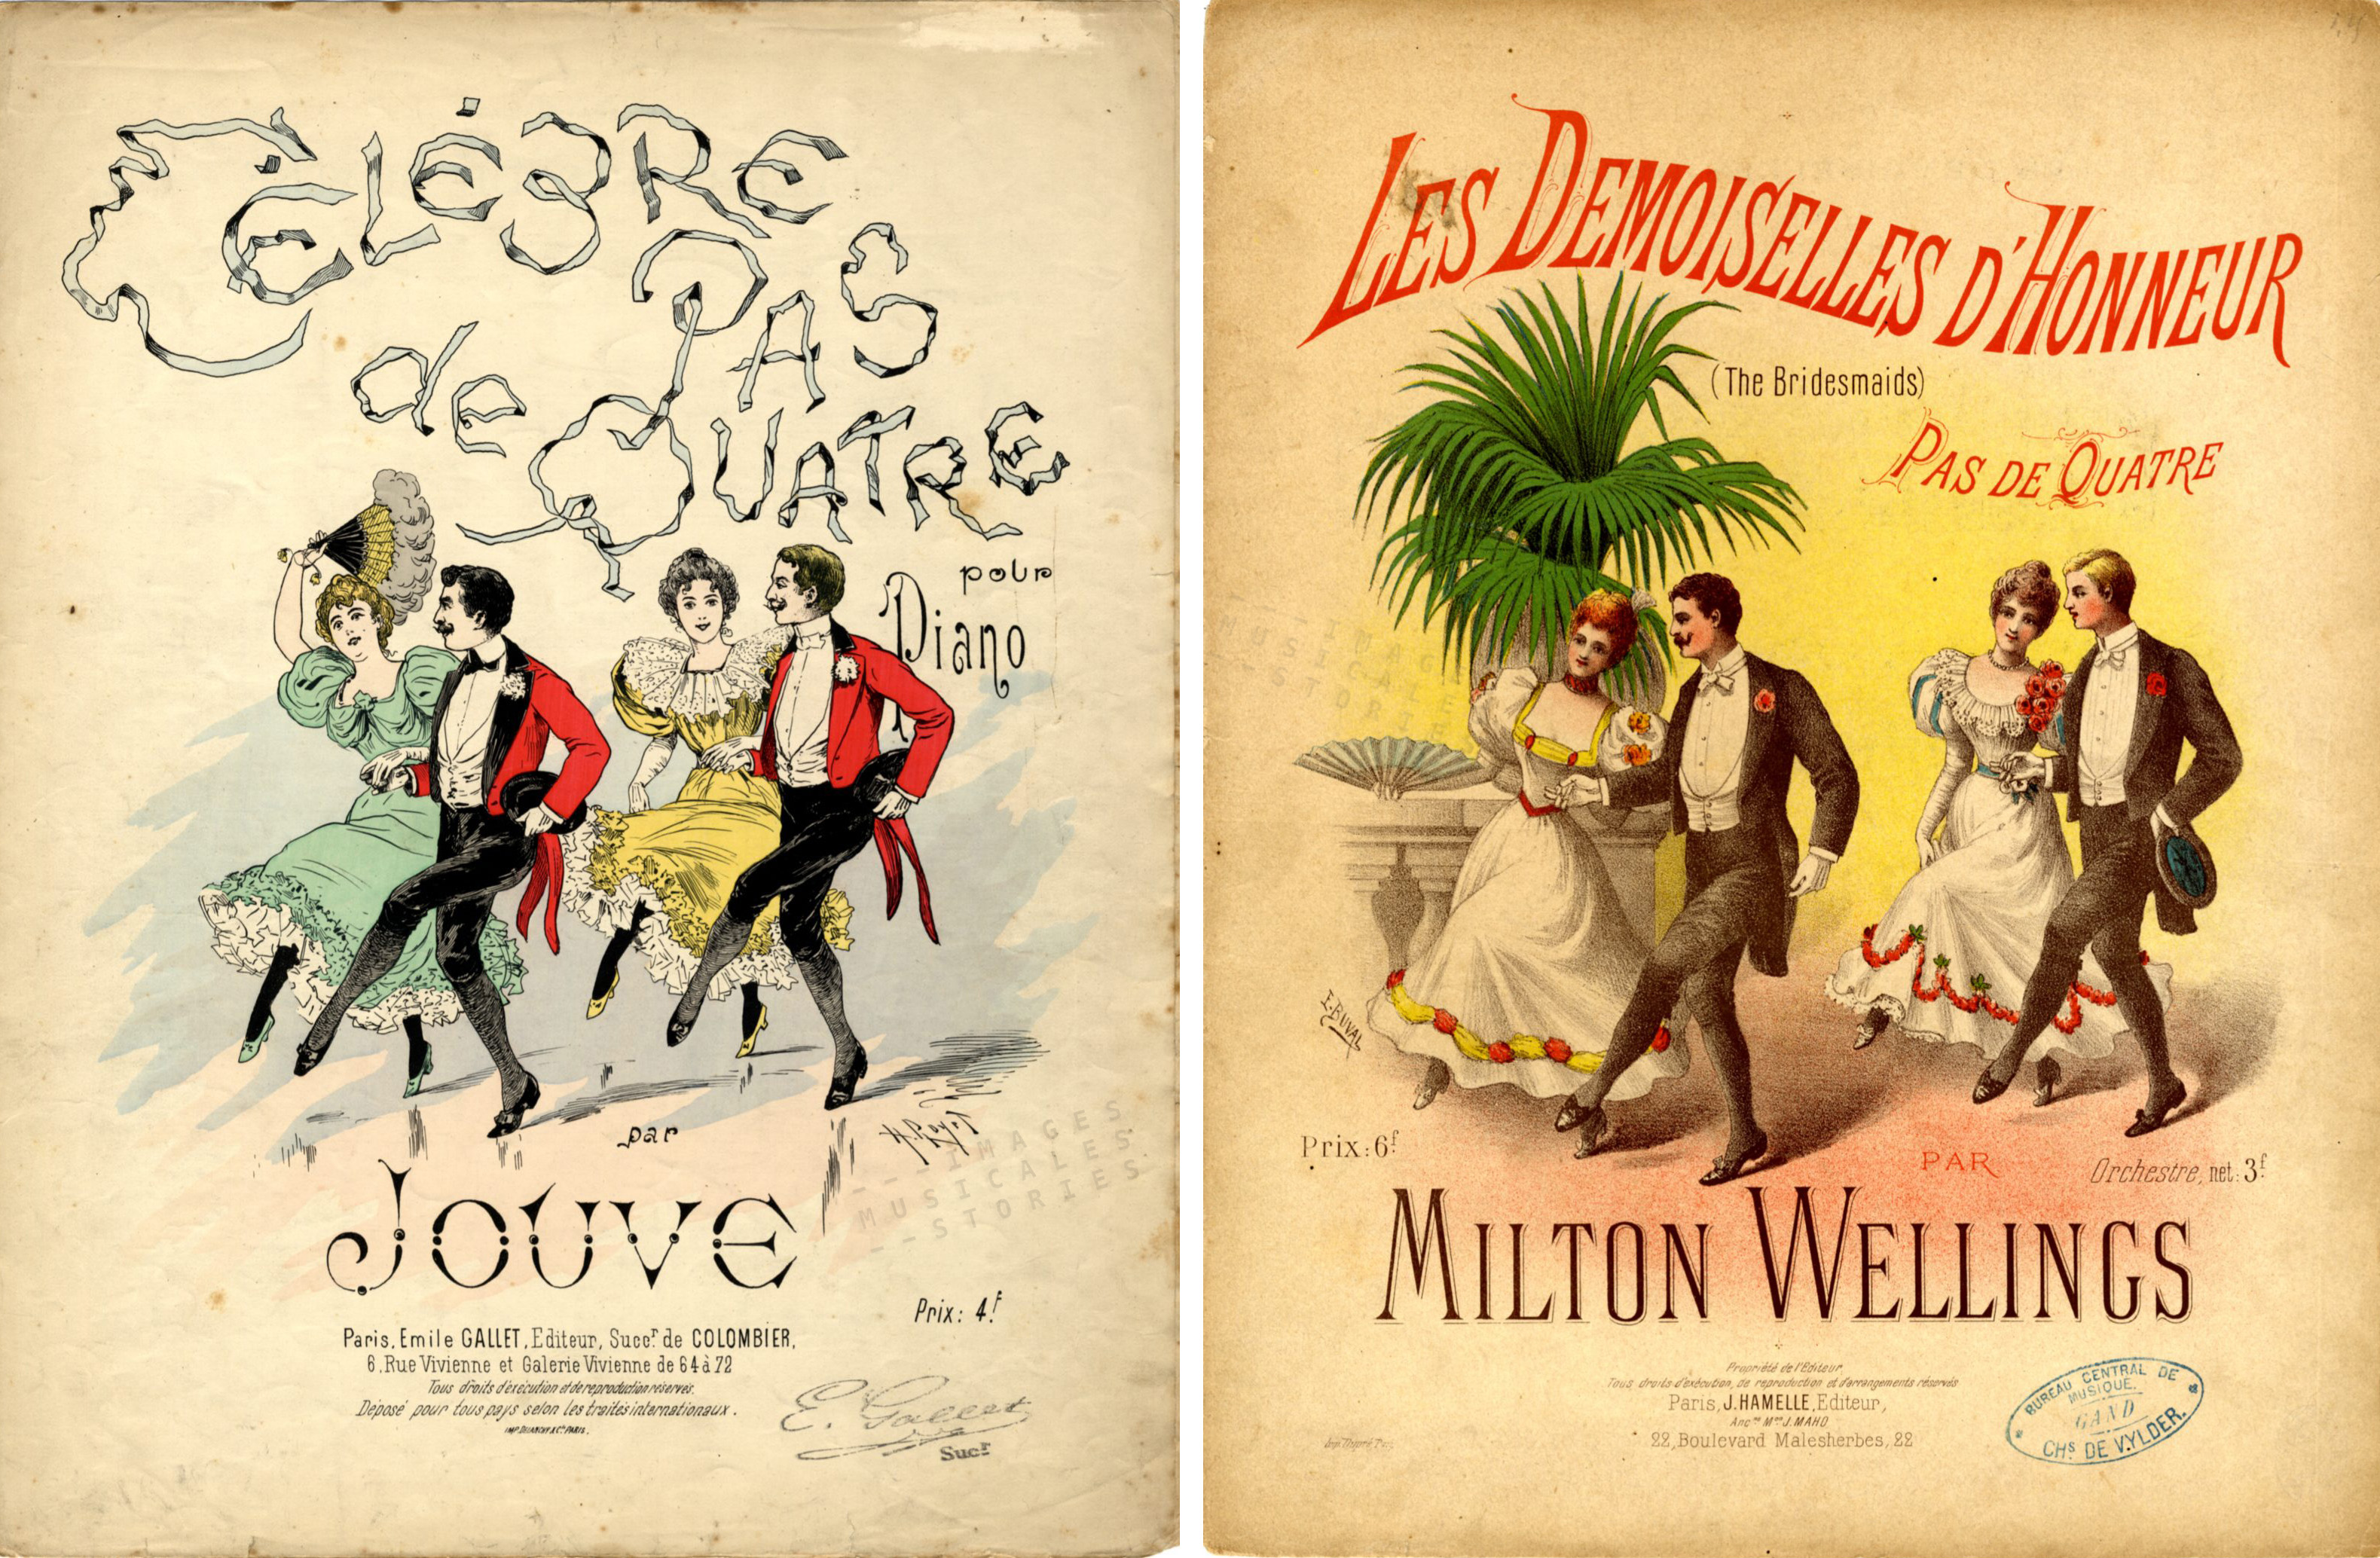 'Pas de Quatre' sheet music covers from www.imagesmusicales.be